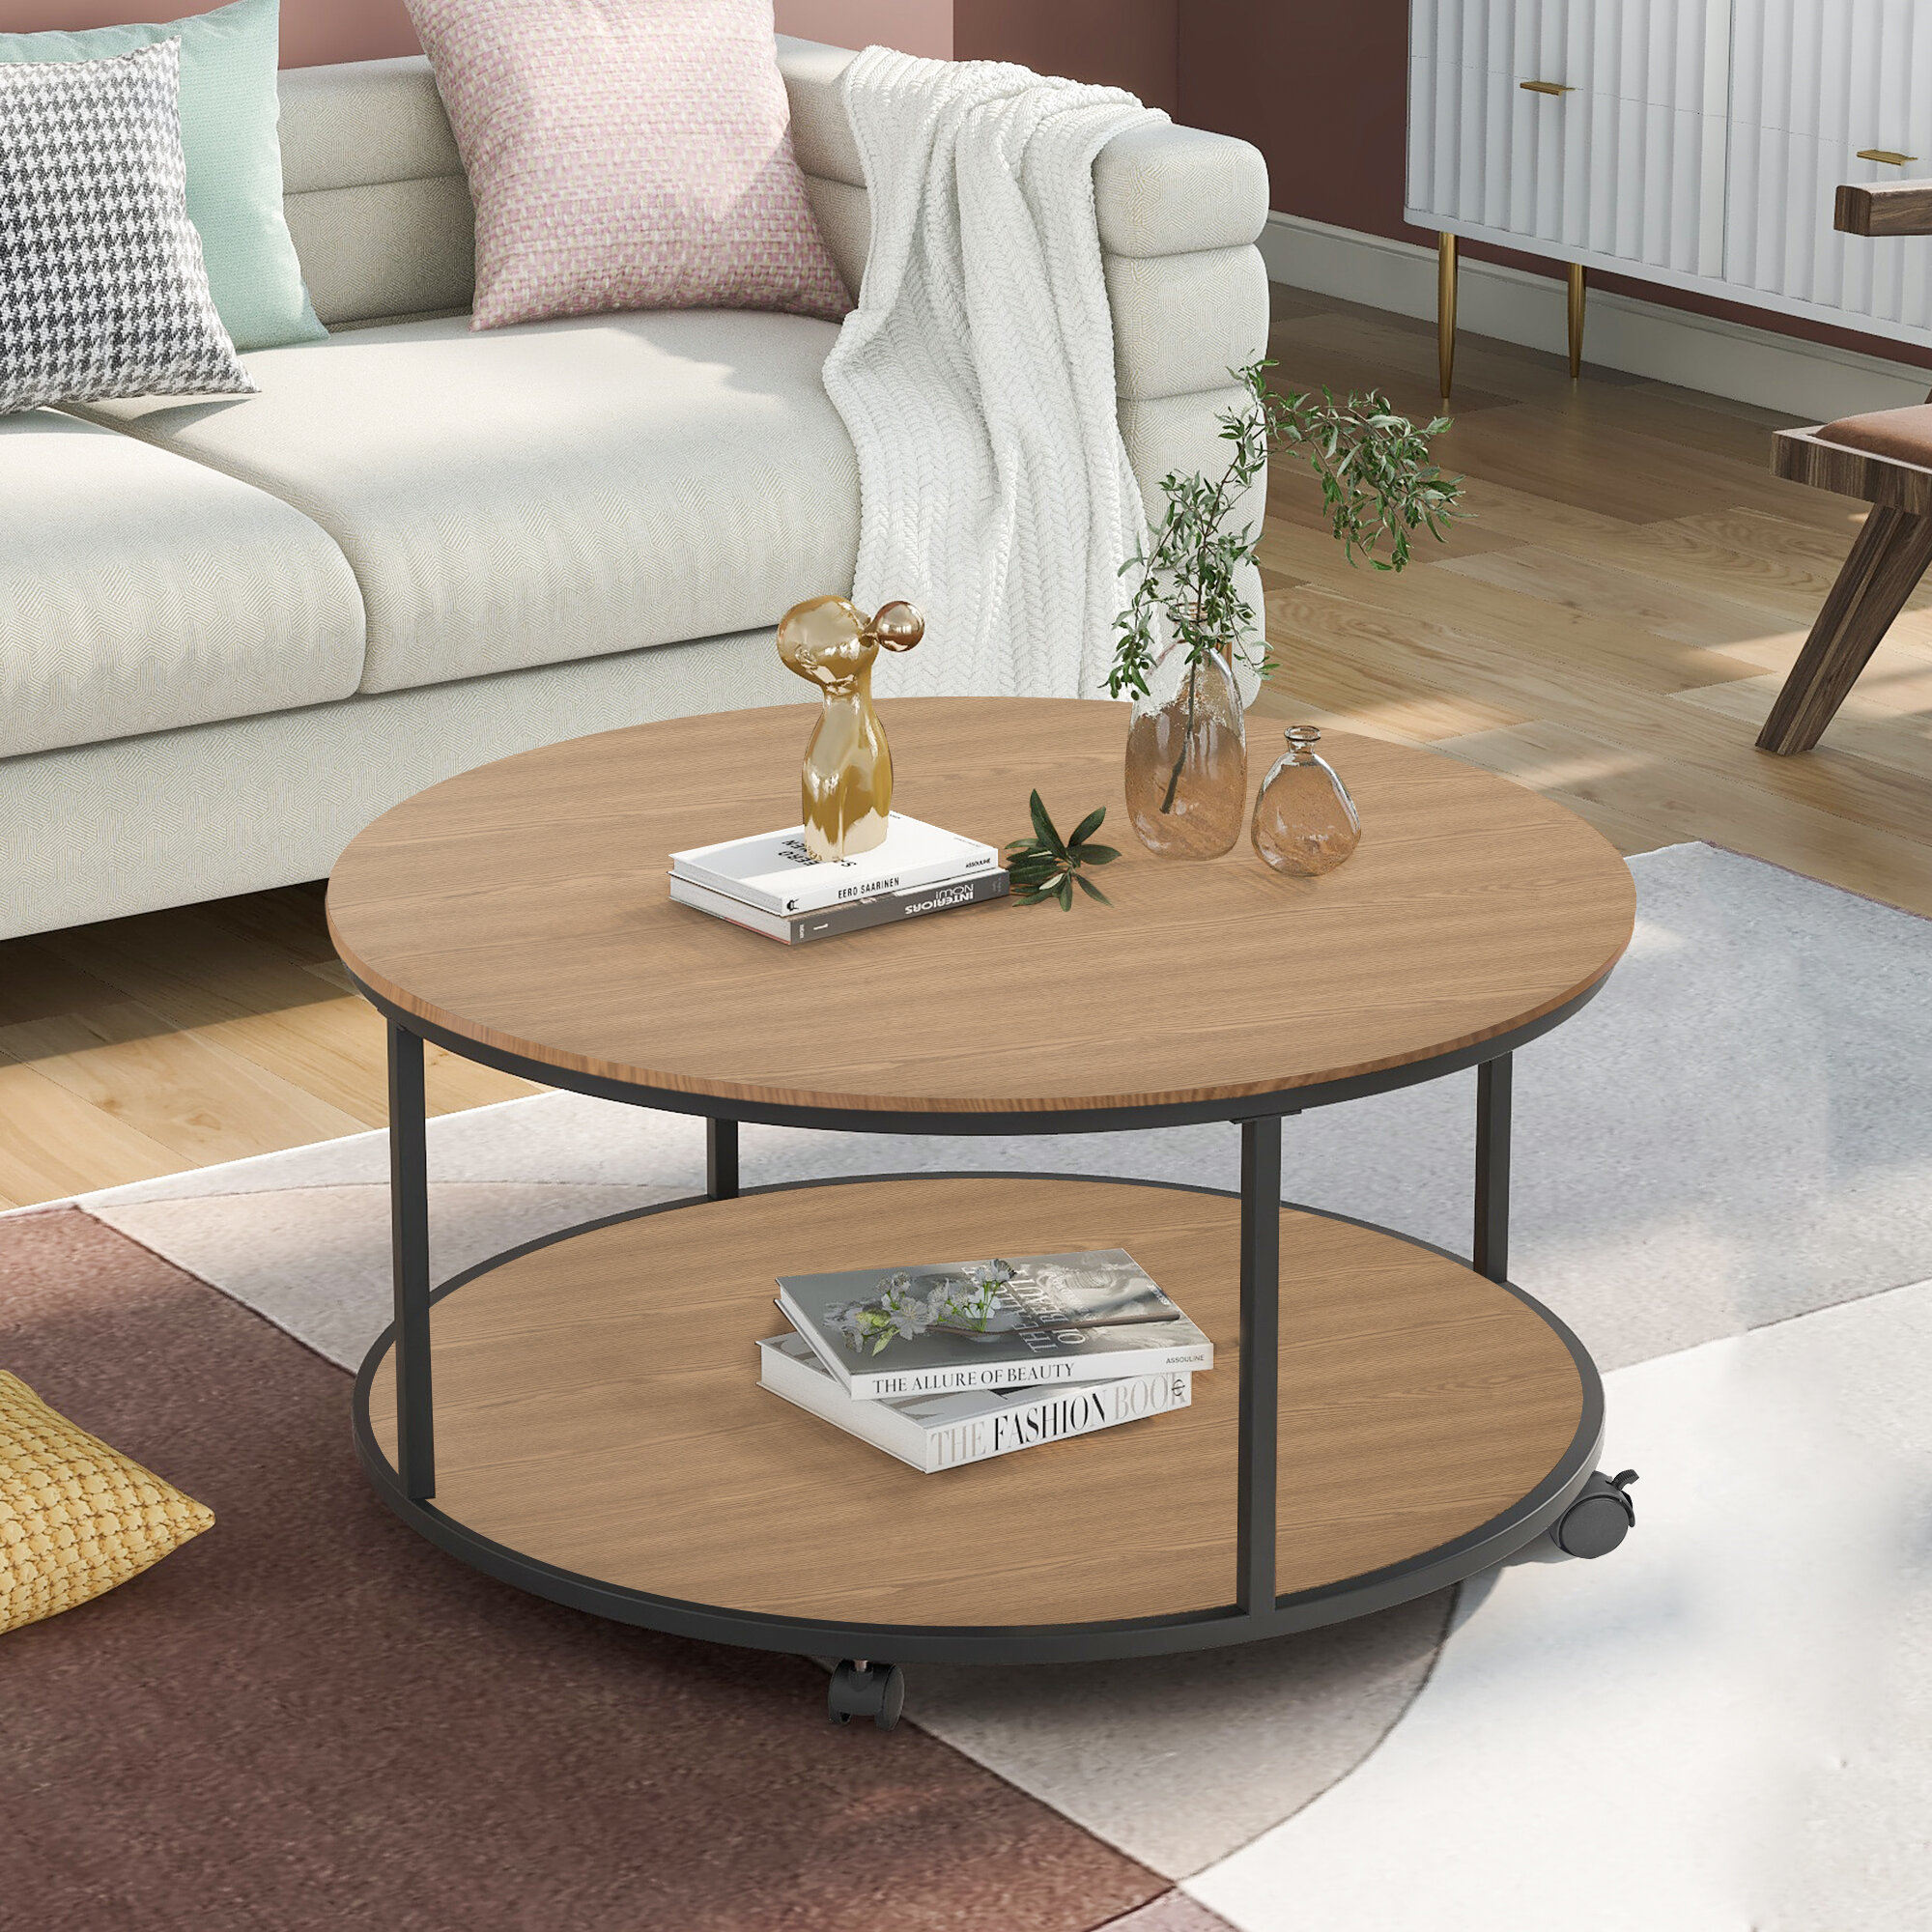 17 Stories Round Coffee Table With Caster Wheels And Wood Textured Surface For Living Room